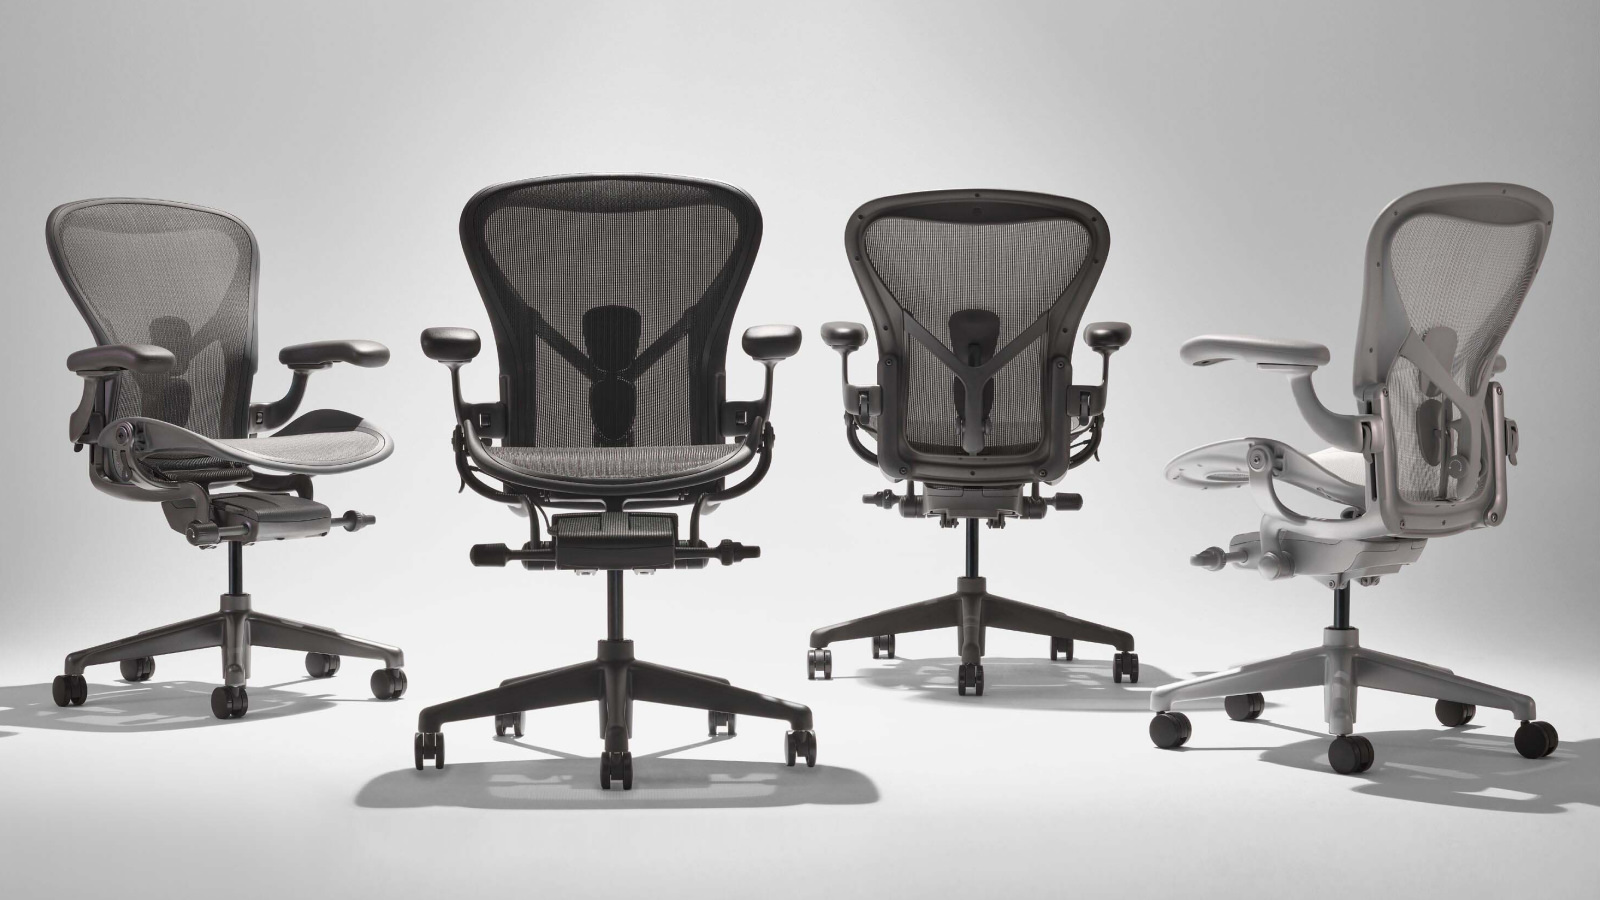 Four Aeron Chairs in four different colors.